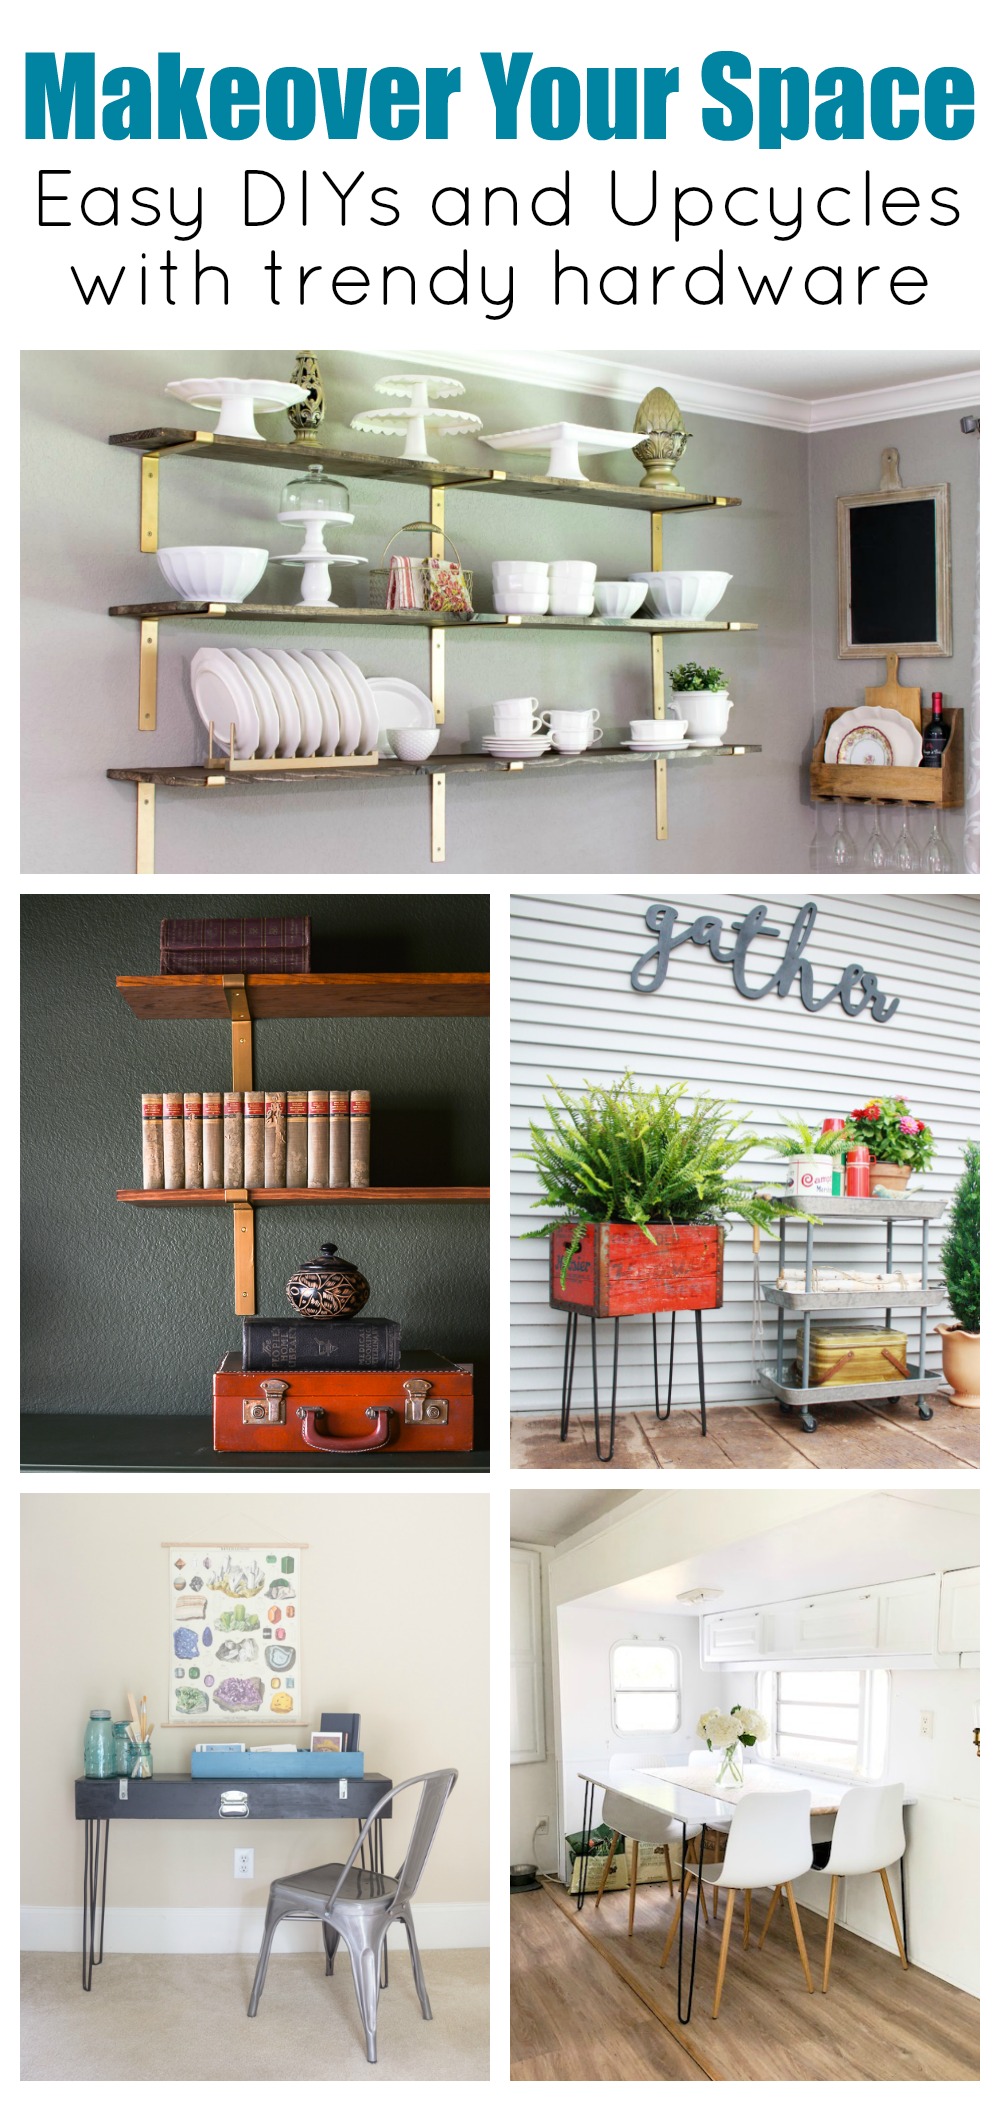 Makeover your space! Easy DIYs and Upcycles with trendy hardware.